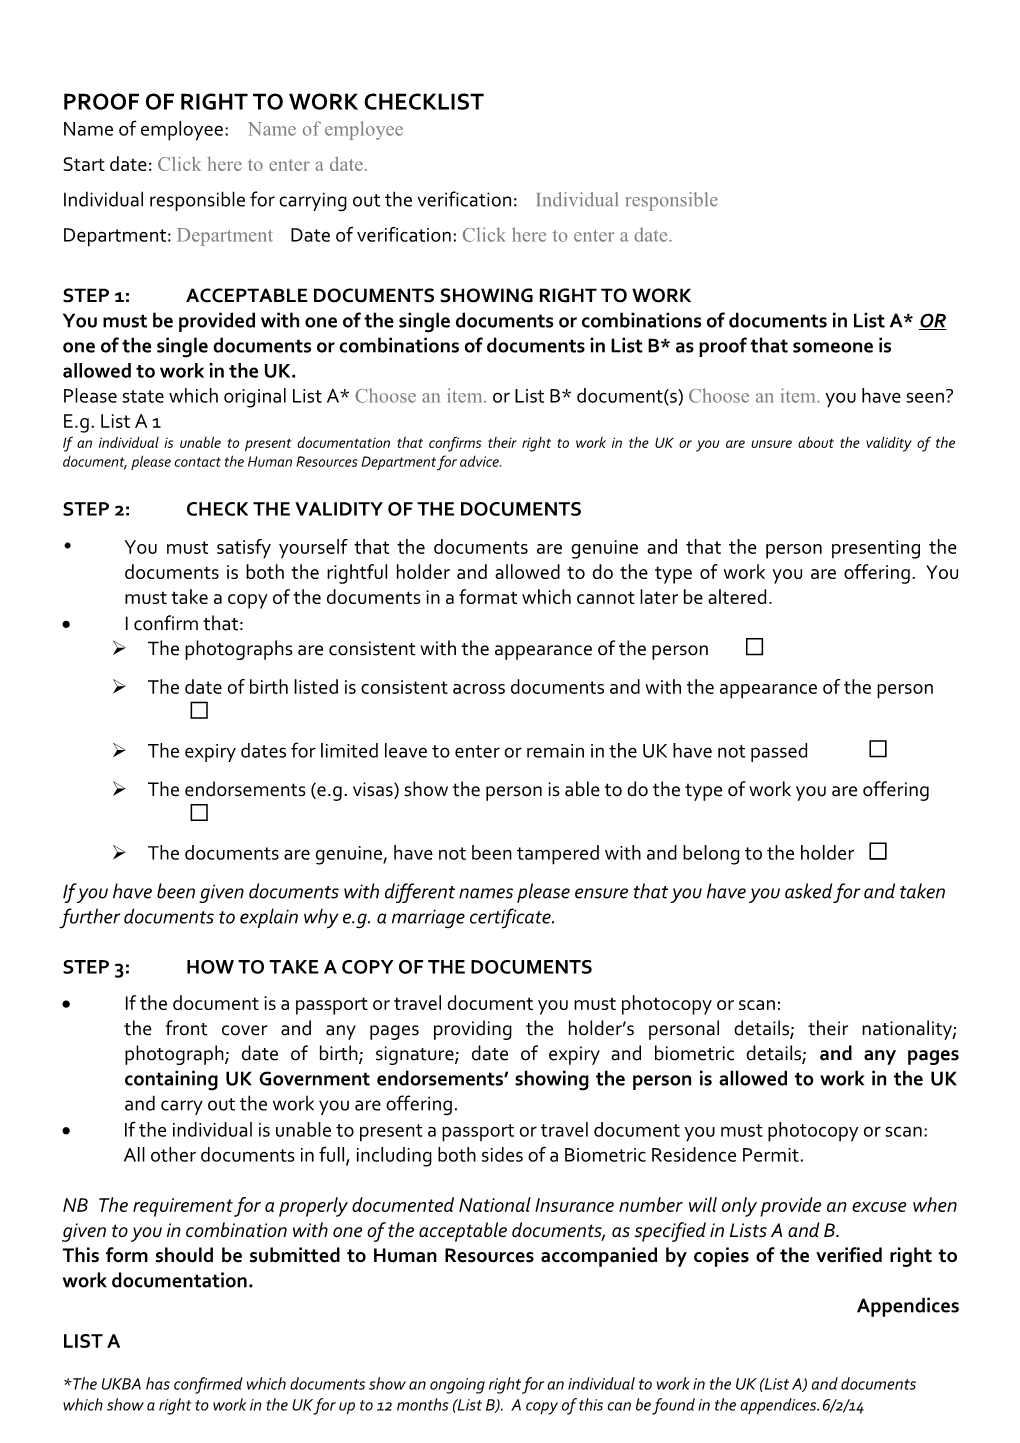 Proof of Right to Work Checklist